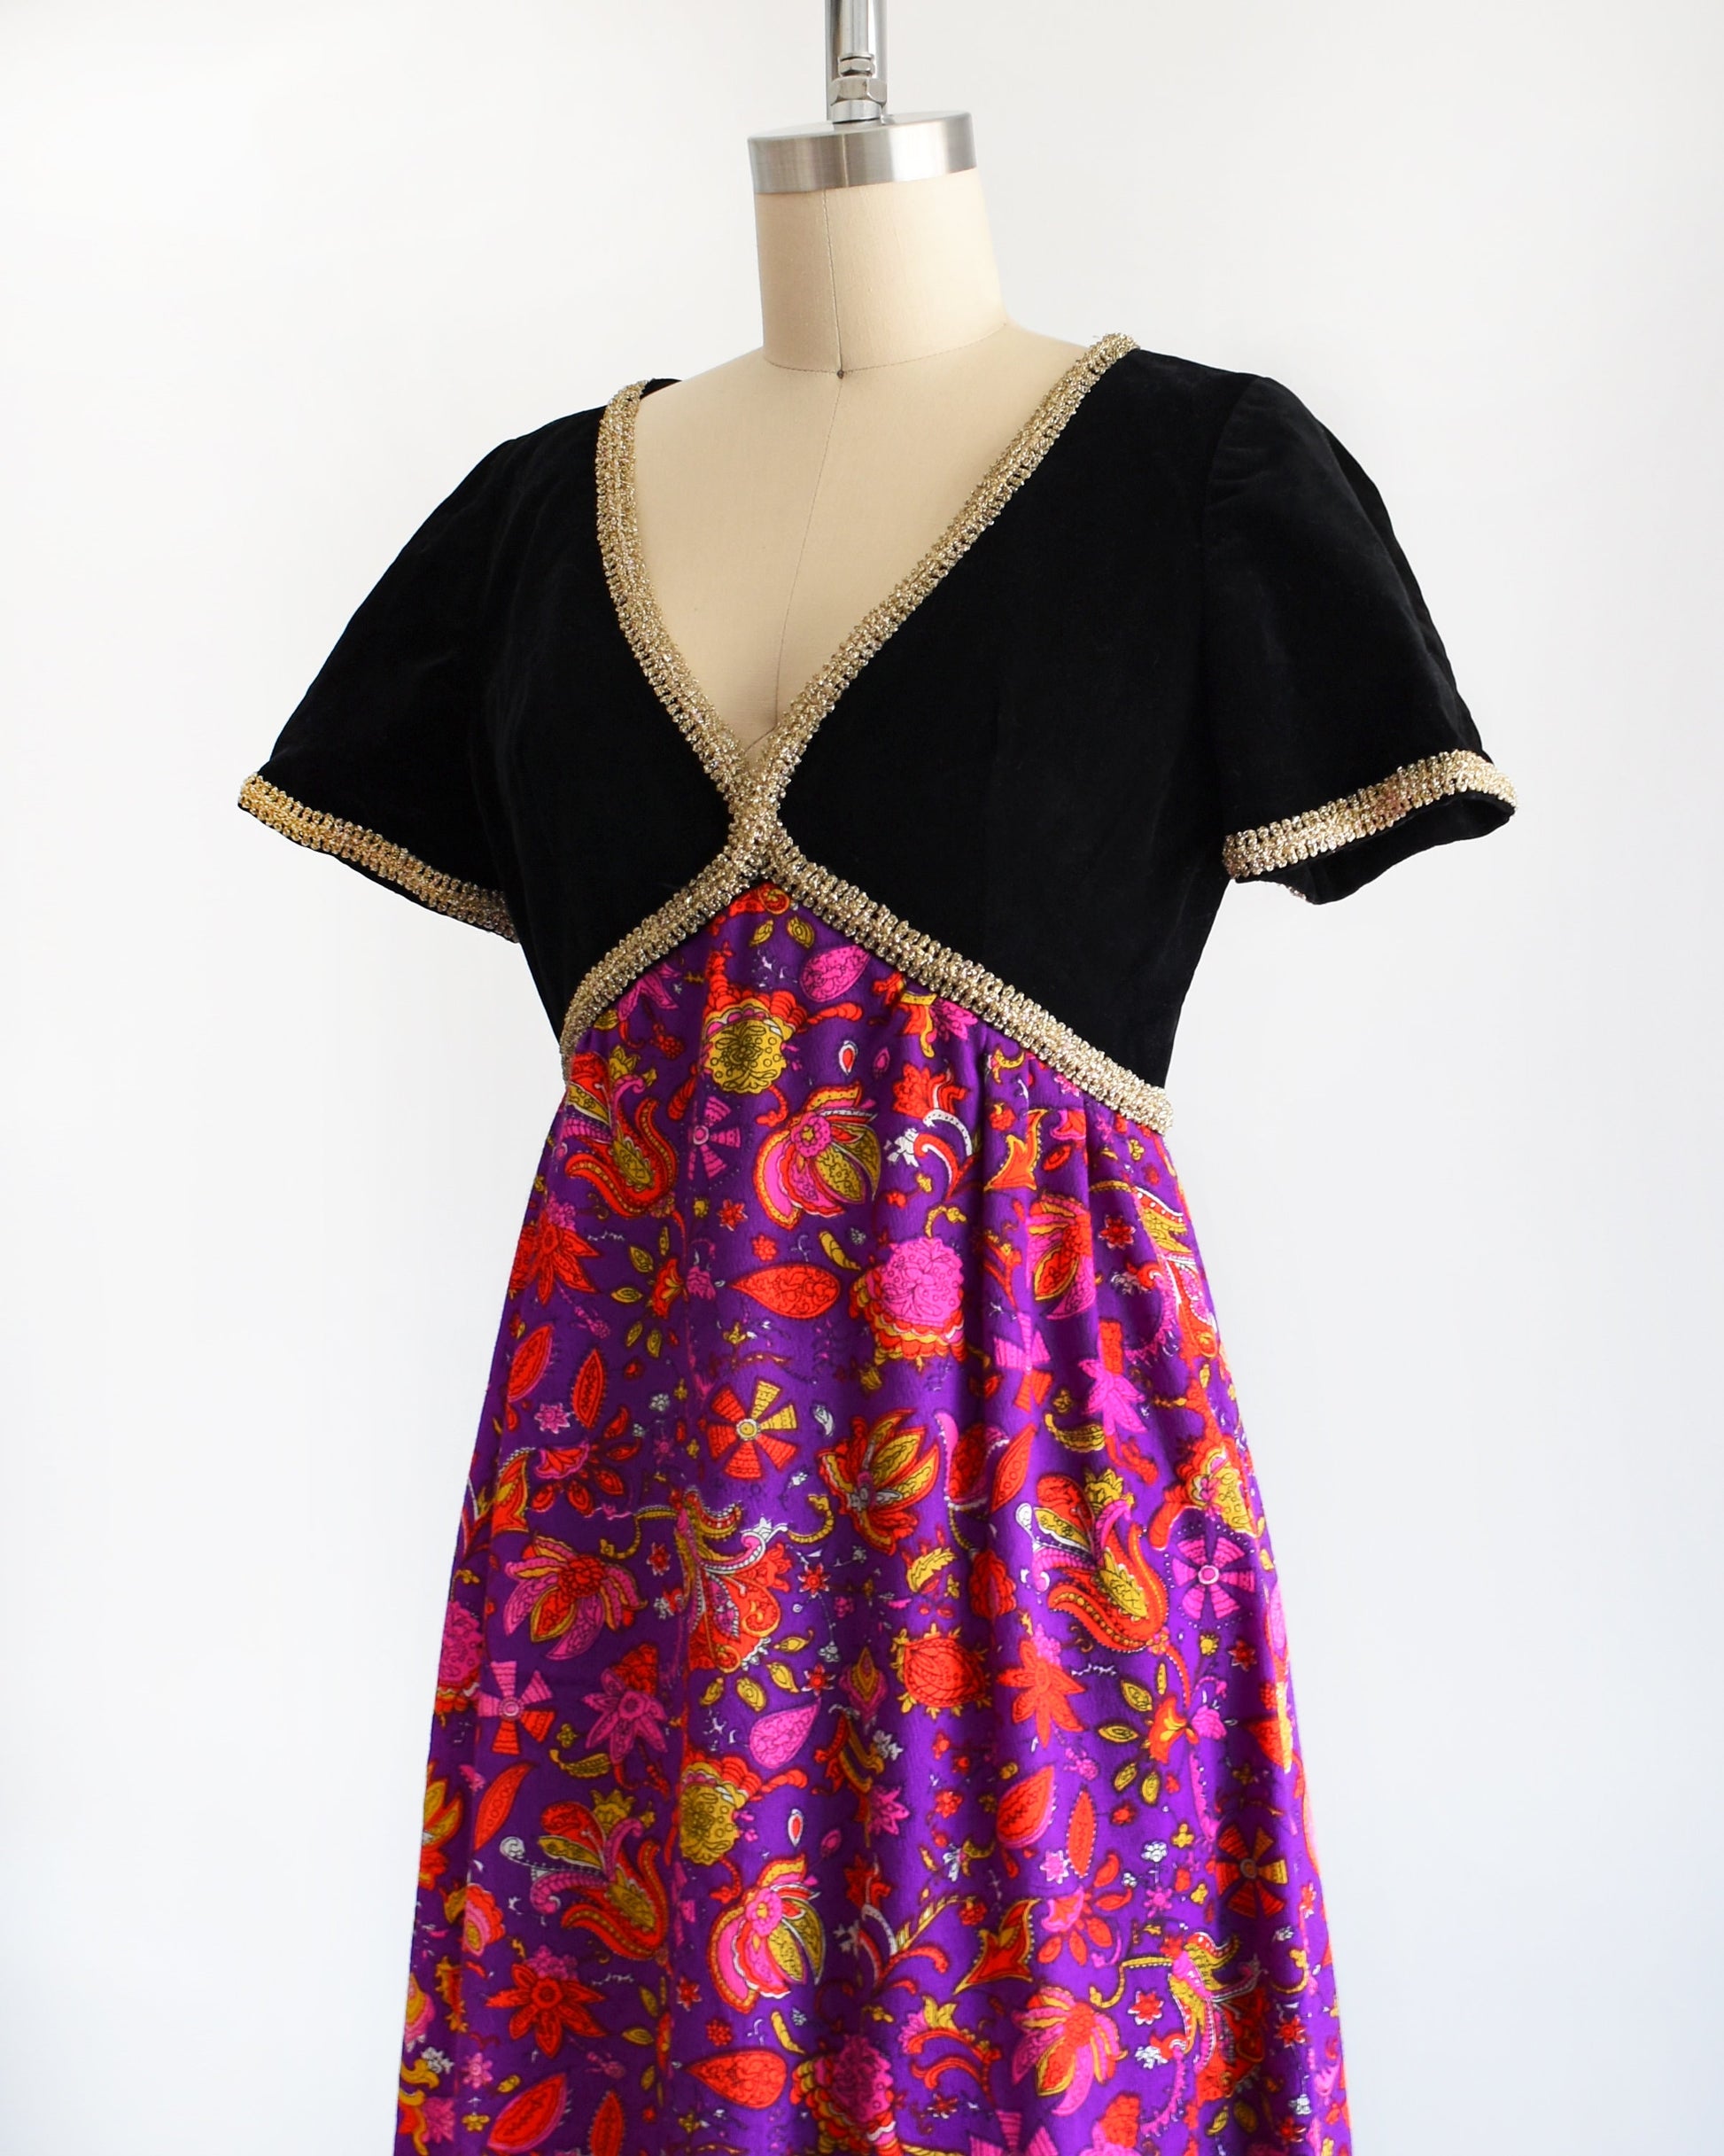 Side front view of a vintage 60s/70s maxi dress that has a black velvet bodice with gold metallic ribbon trim, along with a purple skirt with pink, orange, yellow, and white floral print.